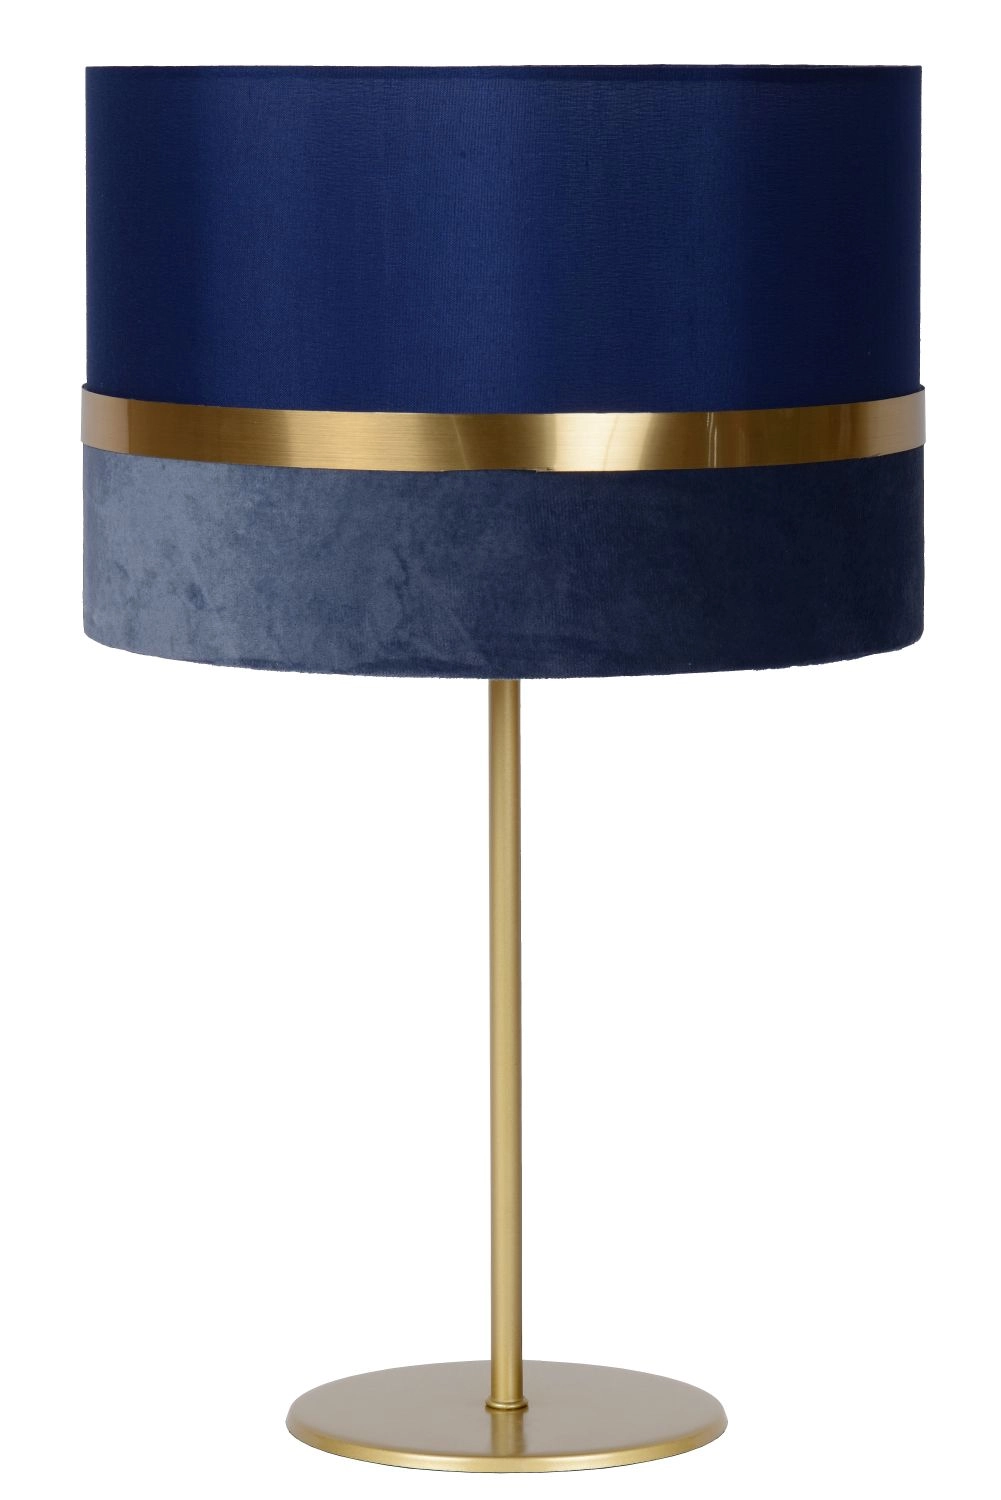 LU 10509/81/35 Lucide EXTRAVAGANZA TUSSE - Table lamp - Ø 30 cm - 1xE14 - Blue